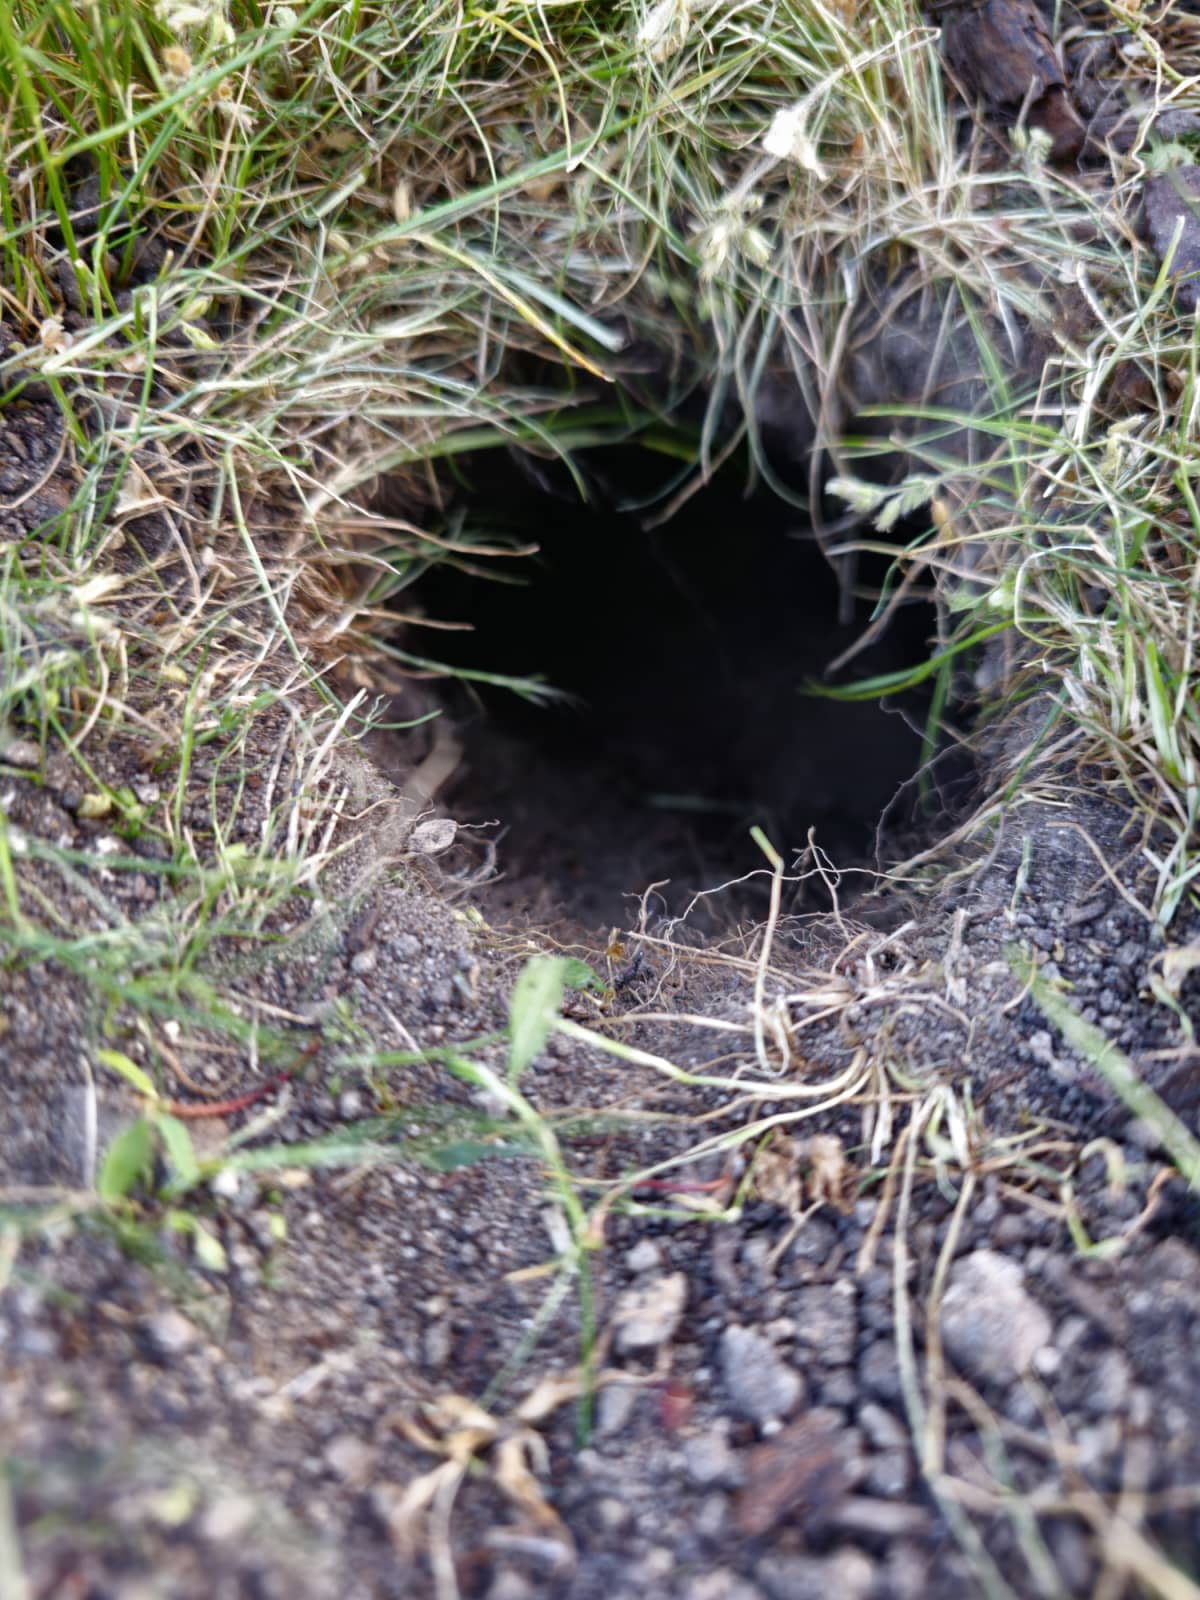 Possible snake hole in a yard